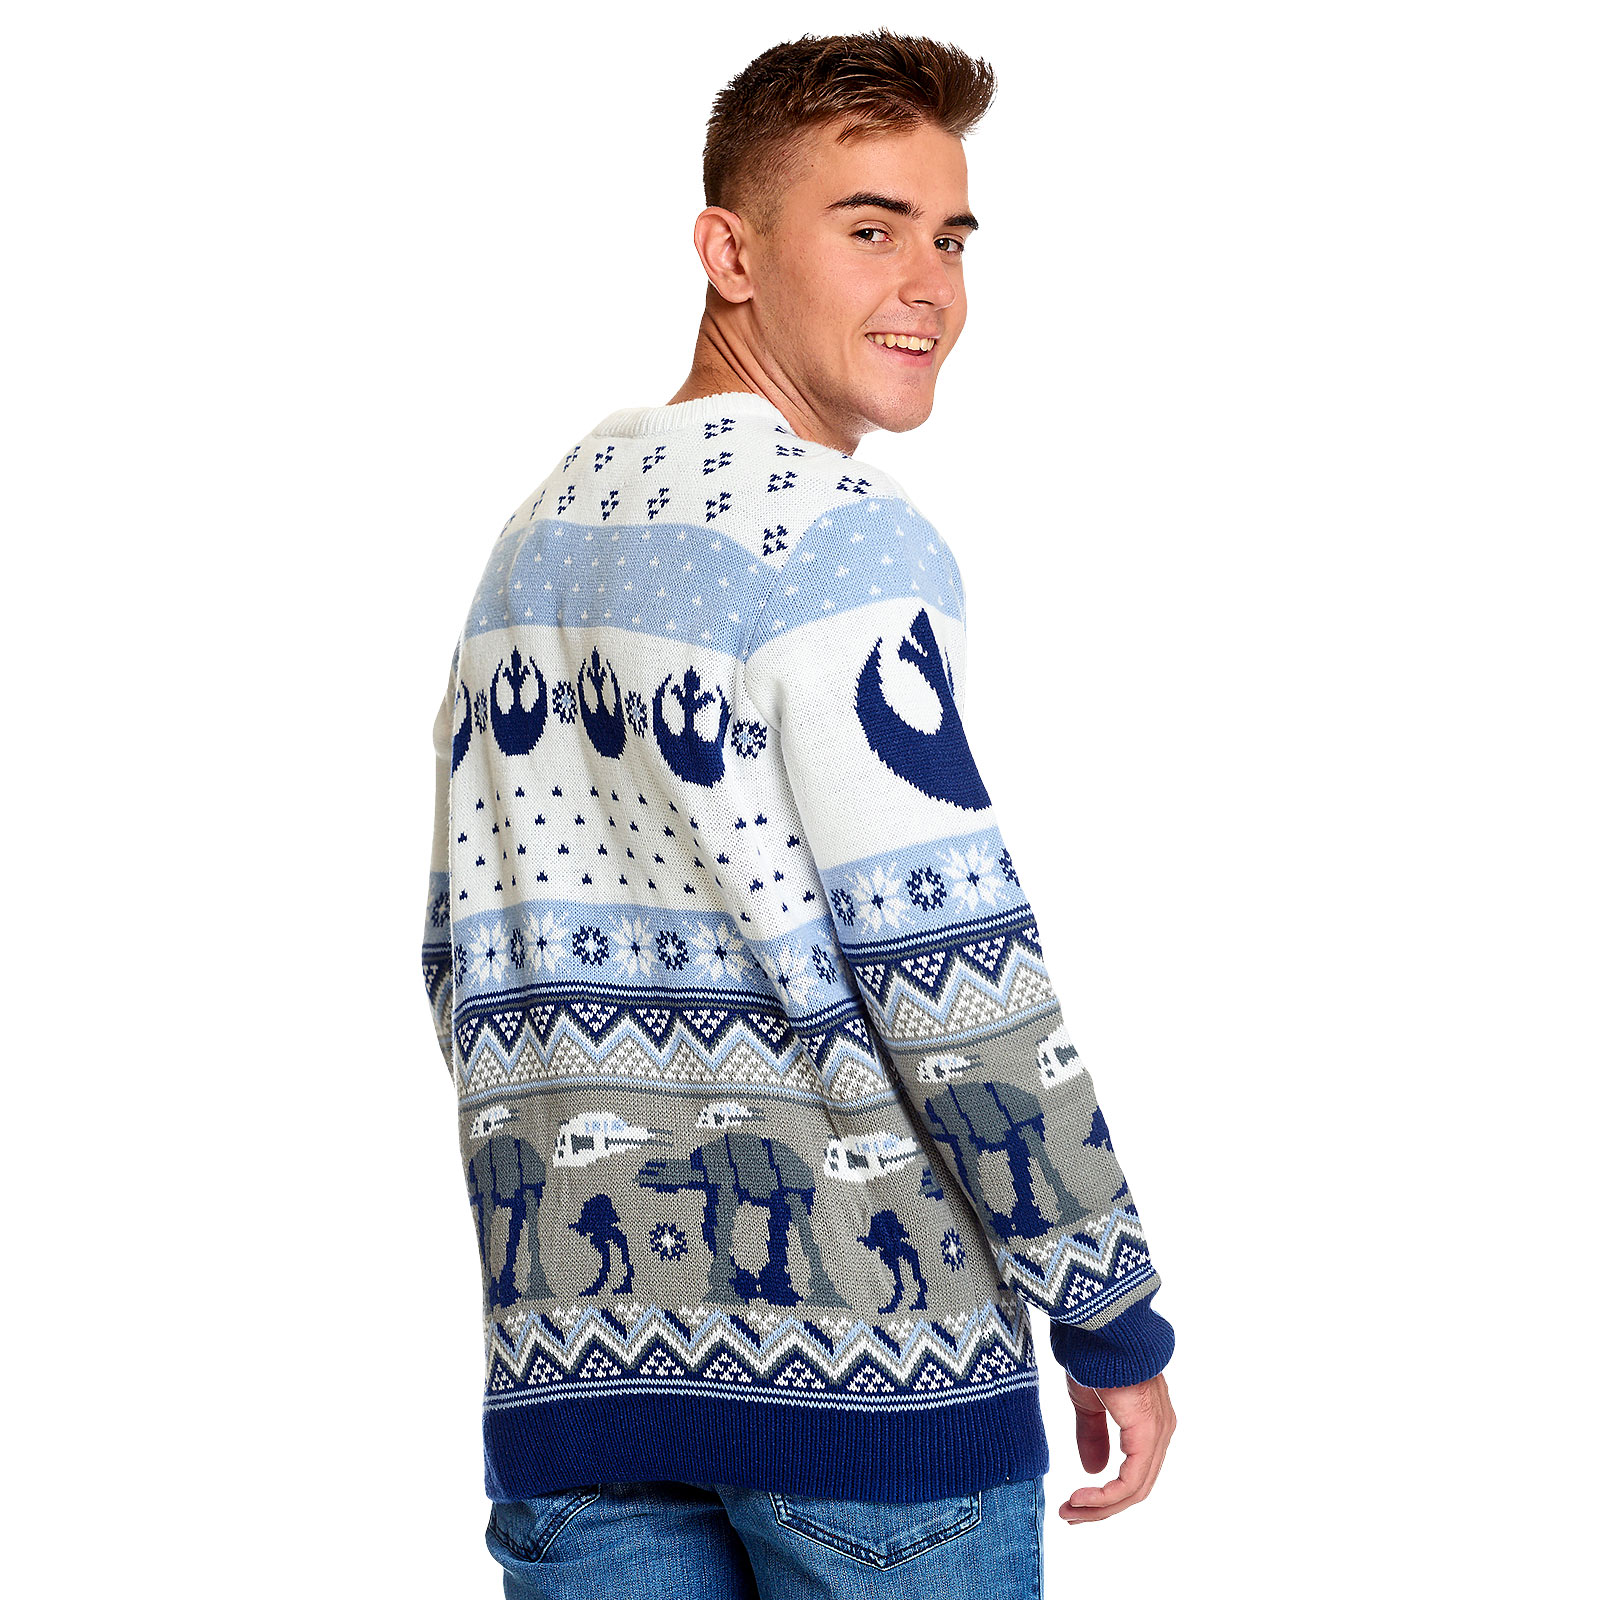 Star Wars - Battle of Hoth Knitted Sweater